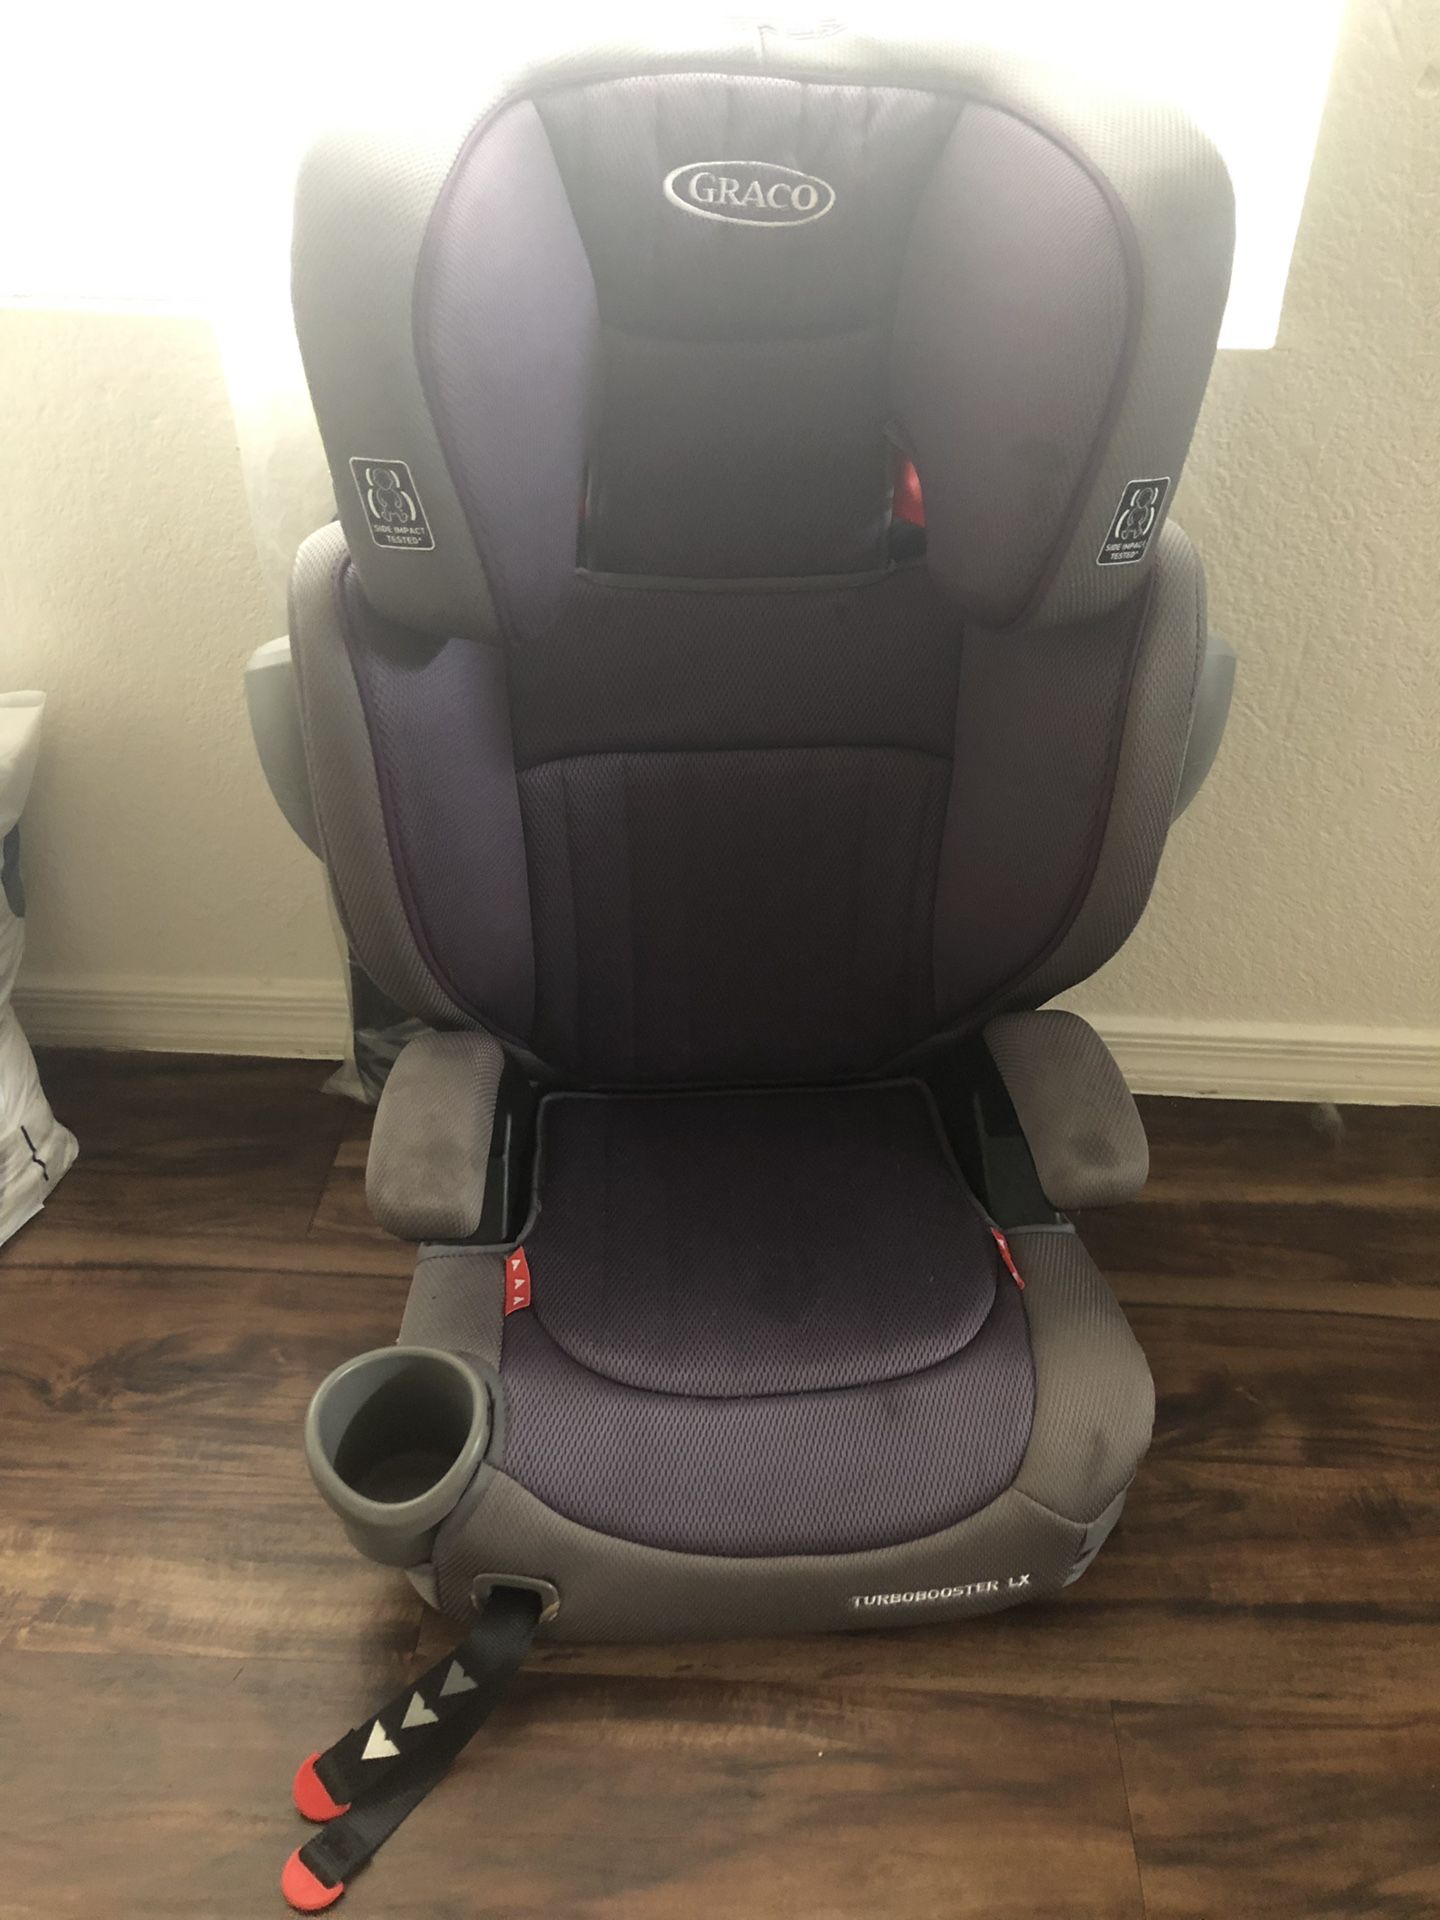 Graco Turbo Booster Car seat